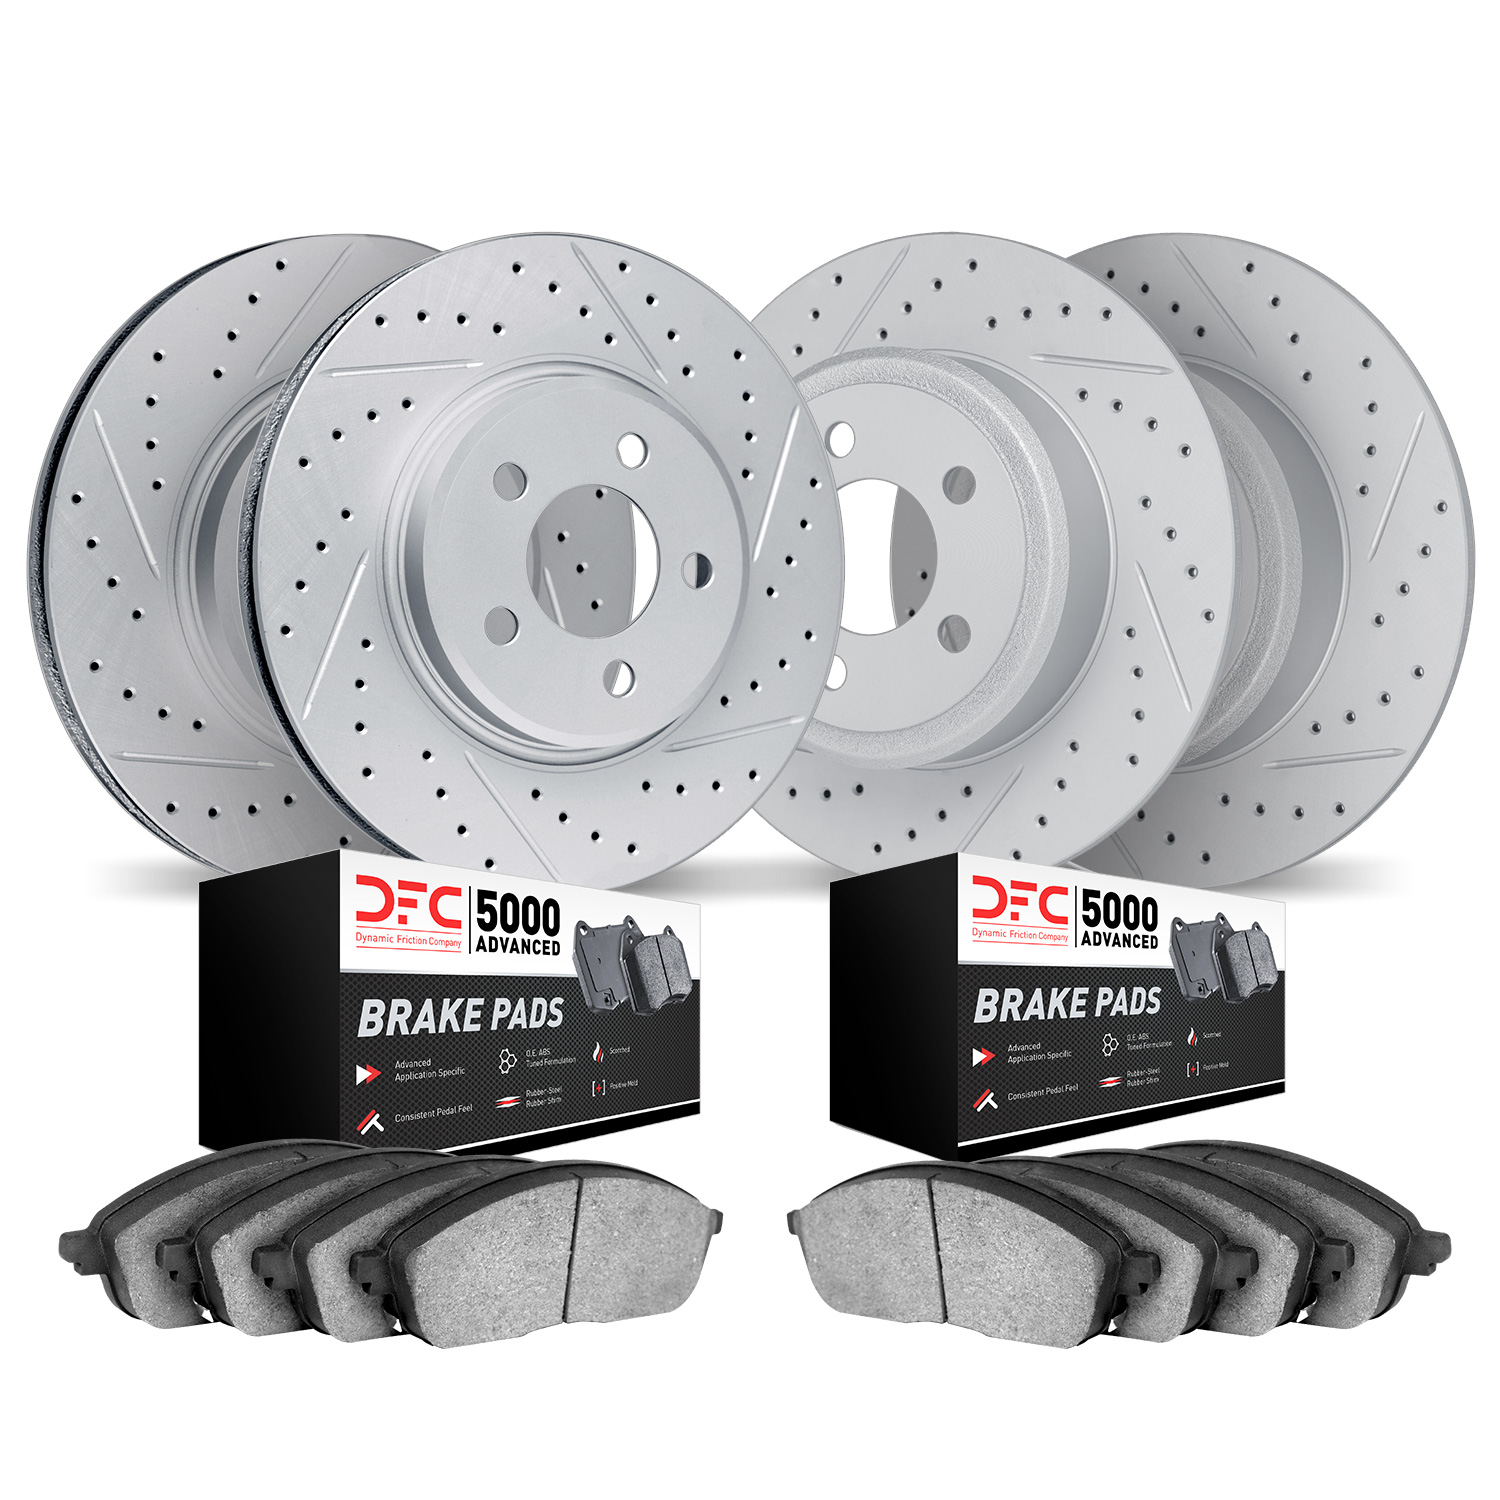 2504-45028 Geoperformance Drilled/Slotted Rotors w/5000 Advanced Brake Pads Kit, 2018-2018 GM, Position: Front and Rear